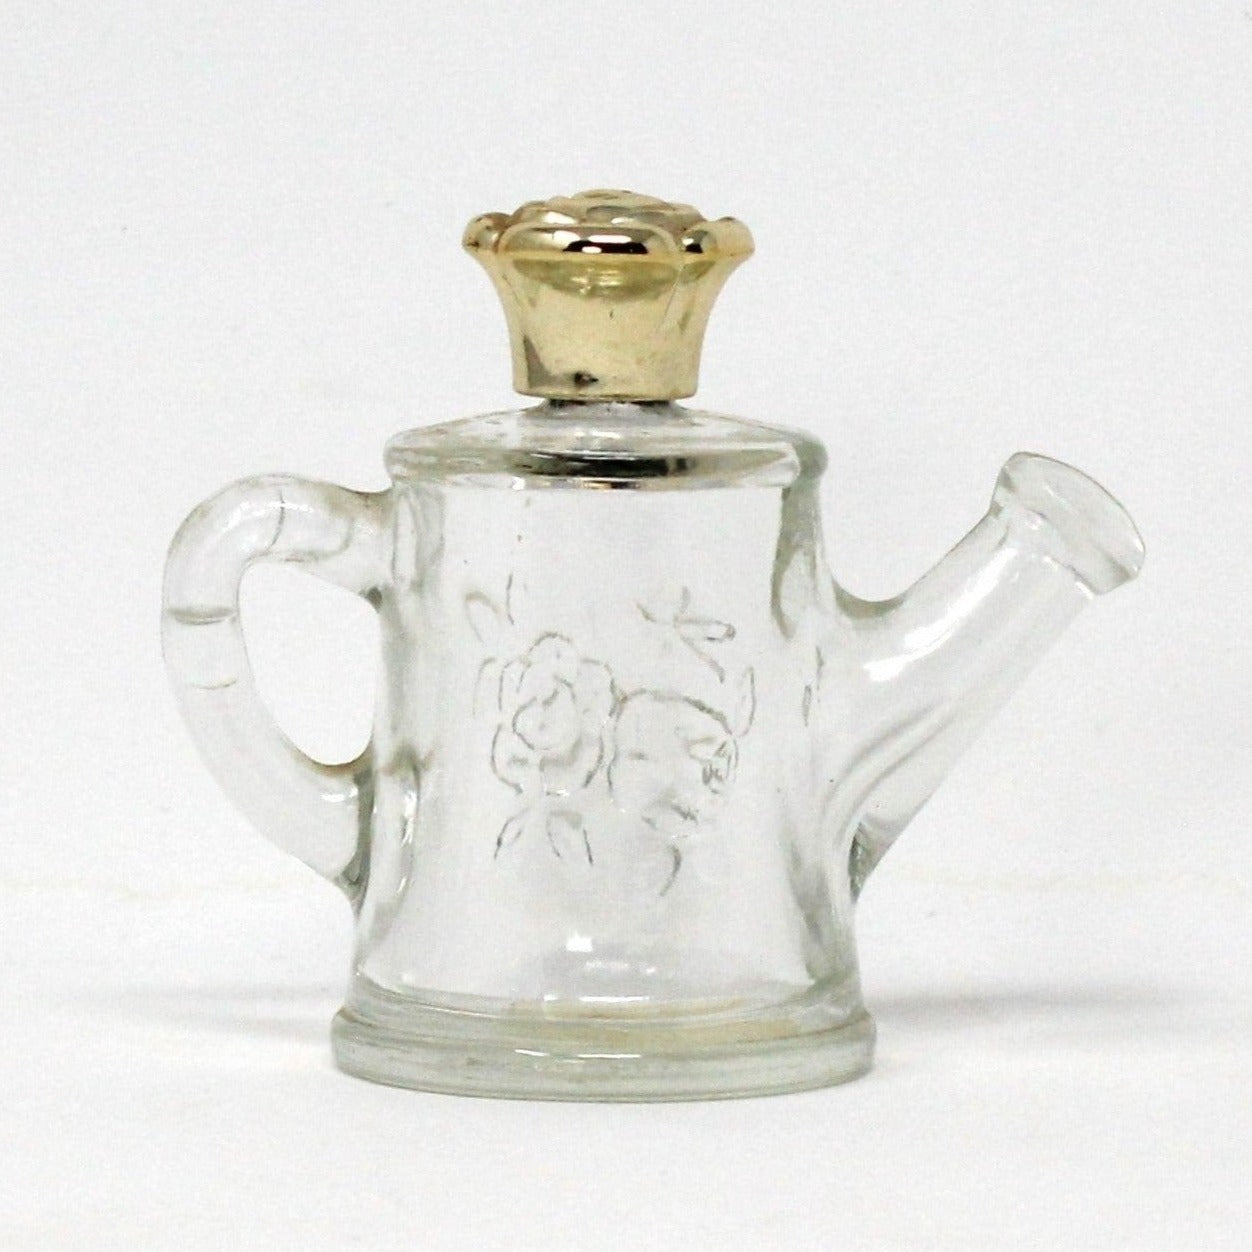 Perfume Bottle, Avon, Watering Can, Embossed Roses, Vintage Collectible